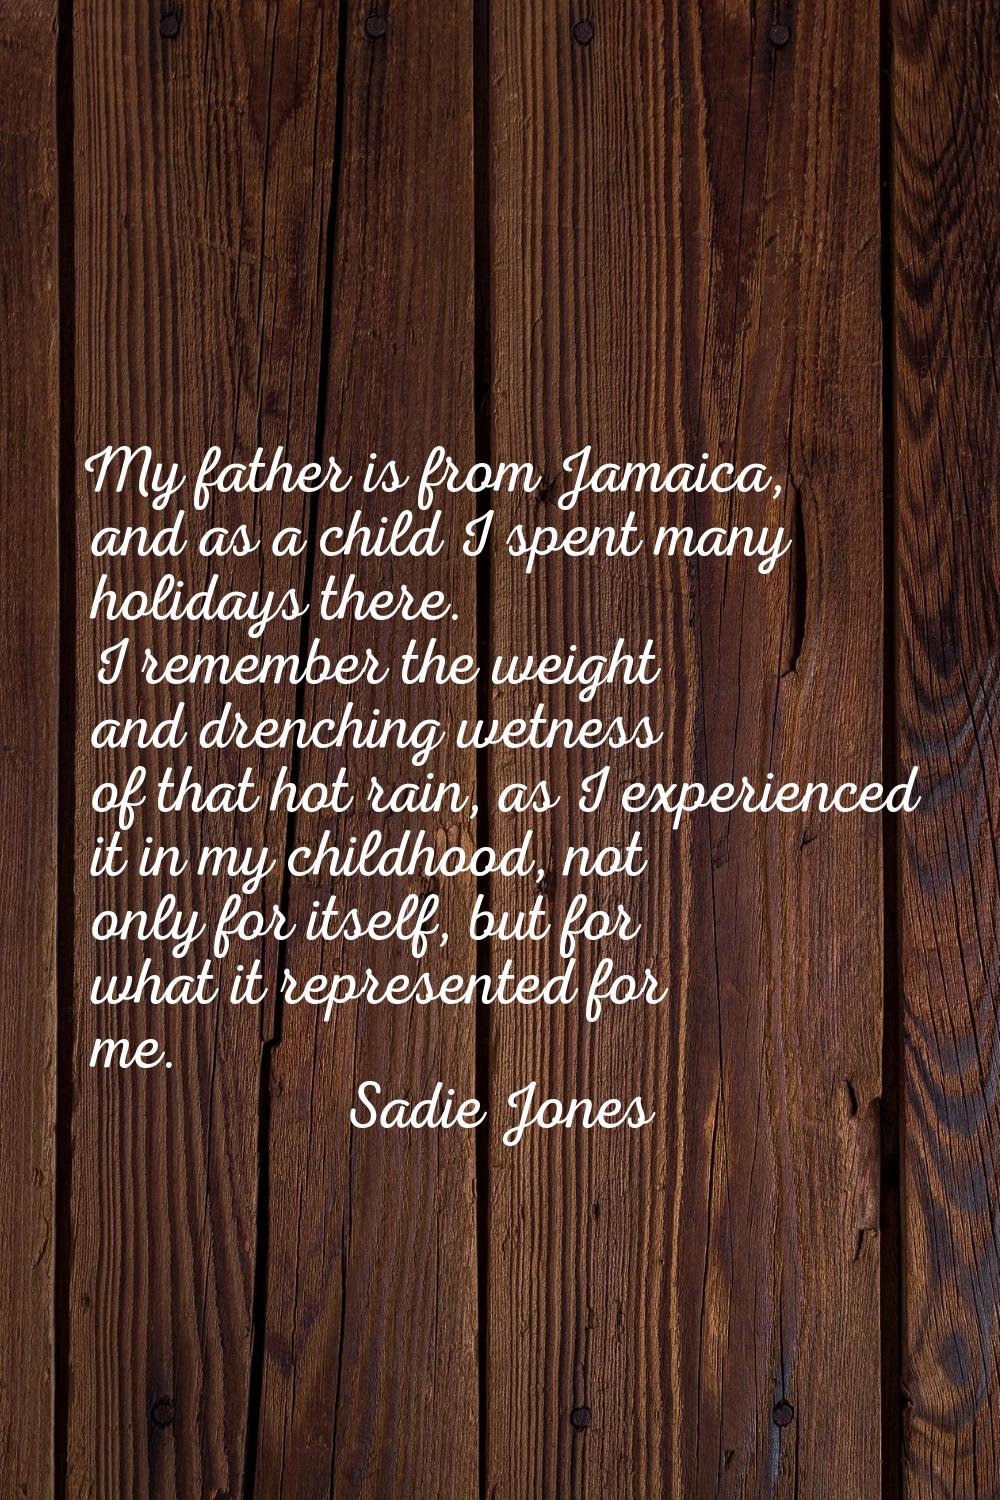 My father is from Jamaica, and as a child I spent many holidays there. I remember the weight and dr